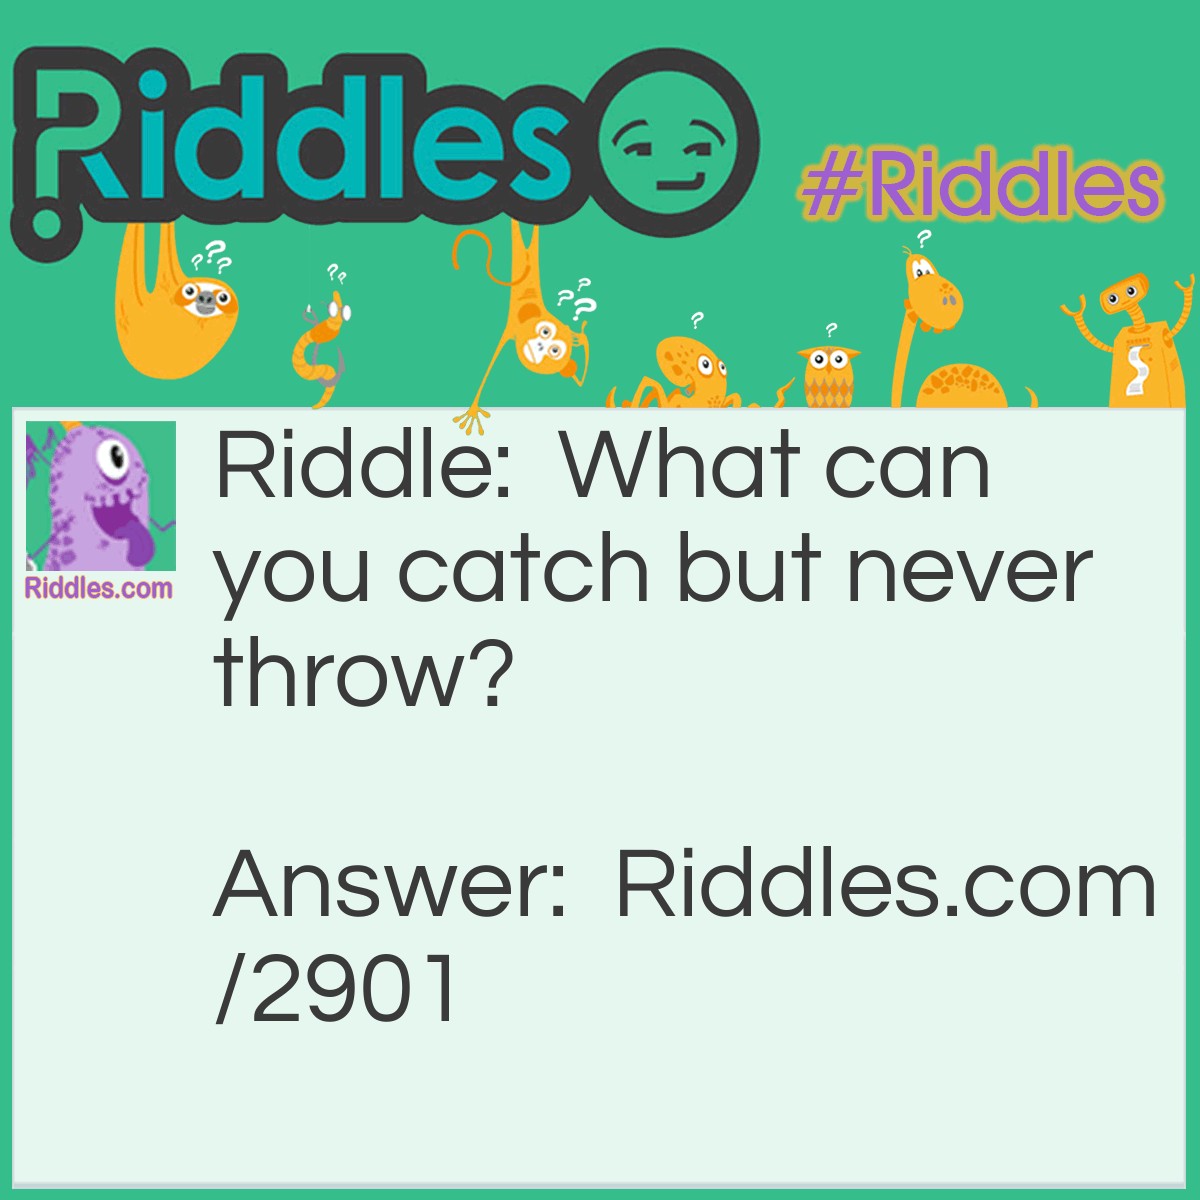 Riddle: What can you catch but not throw? Answer: A cold!